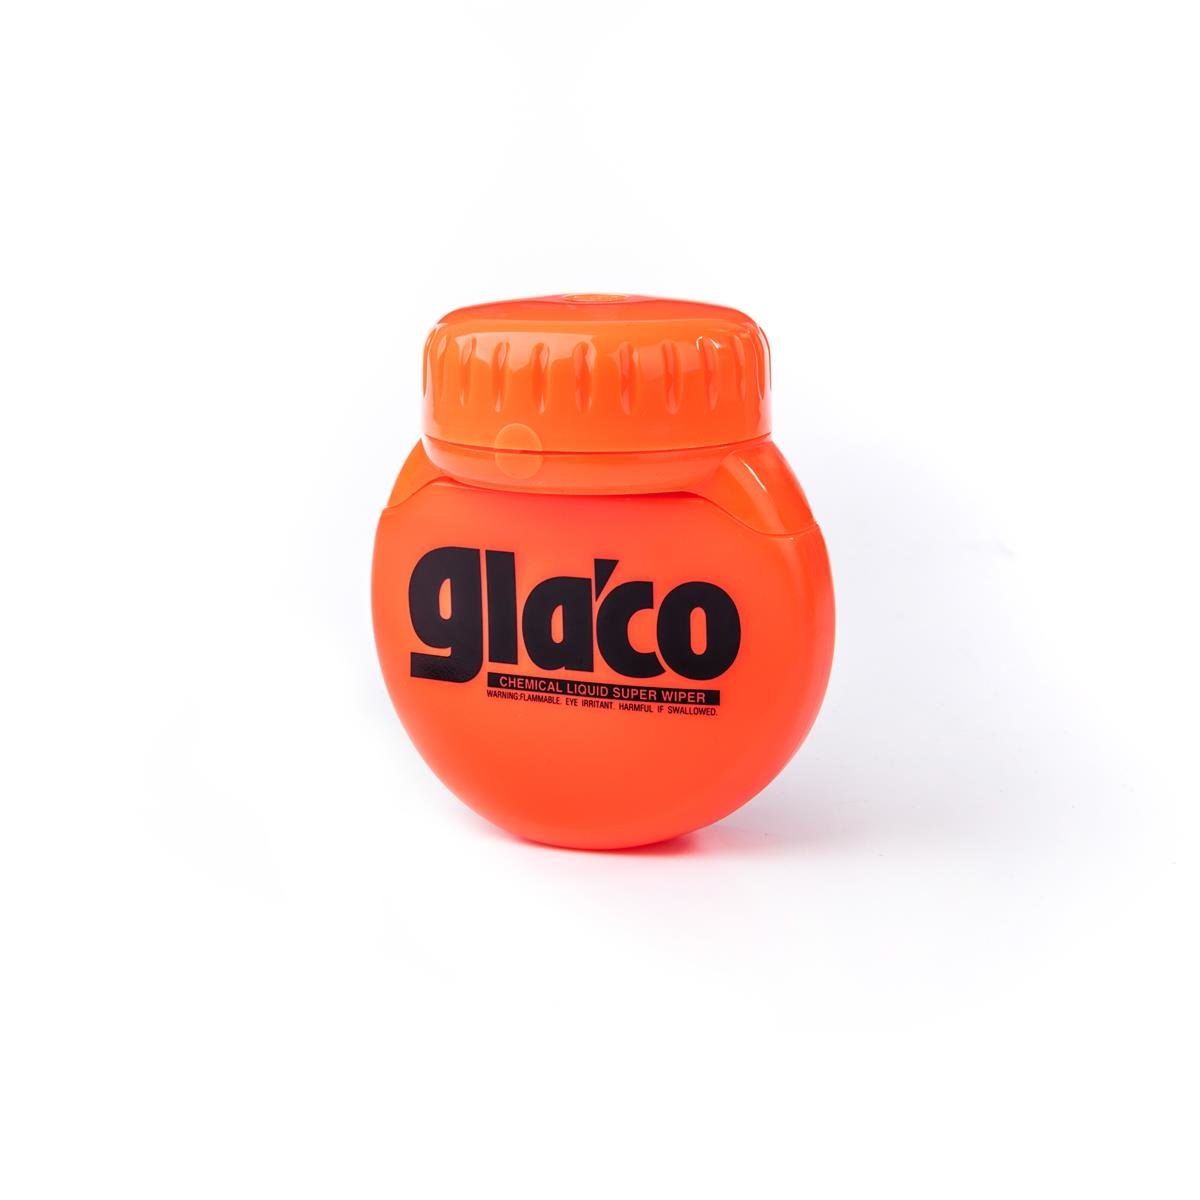 SOFT99 GLACO ROLL ON LARGE 120ml